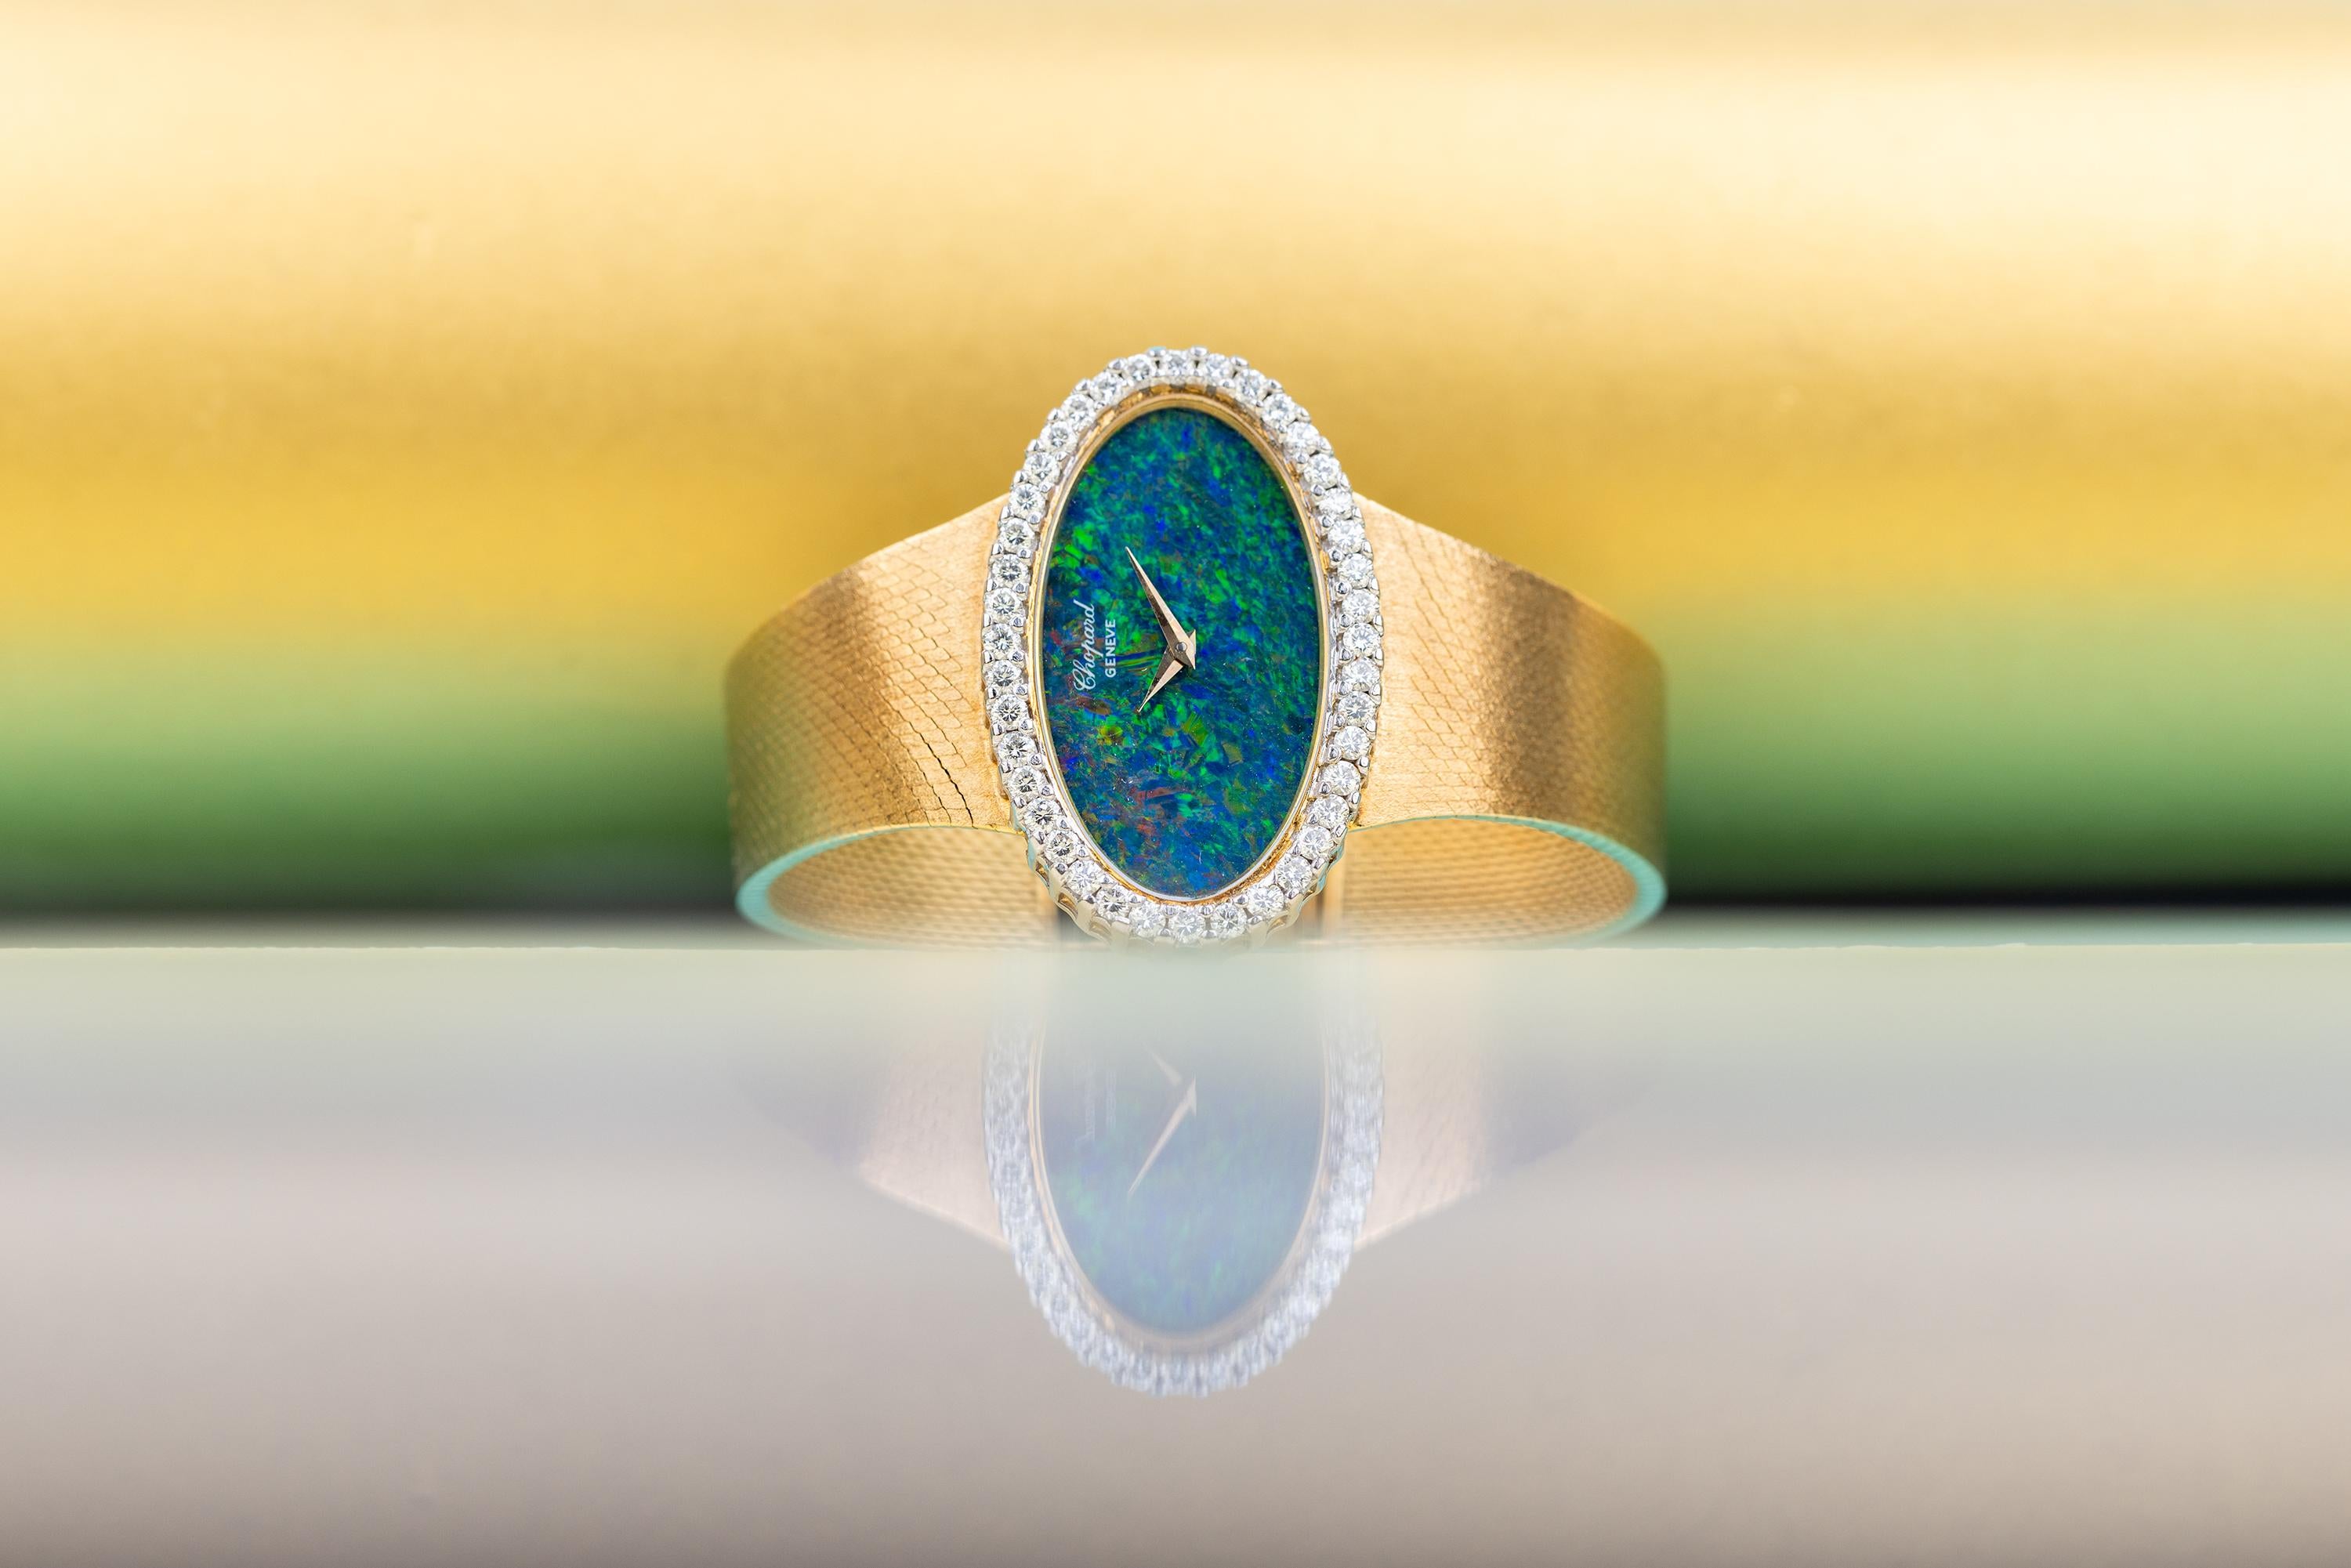 Chopard | REF. 5053 1 | Rare Opal Dial & Large Diamond Bezel | Oblong Case | 18k In Excellent Condition For Sale In London, GB